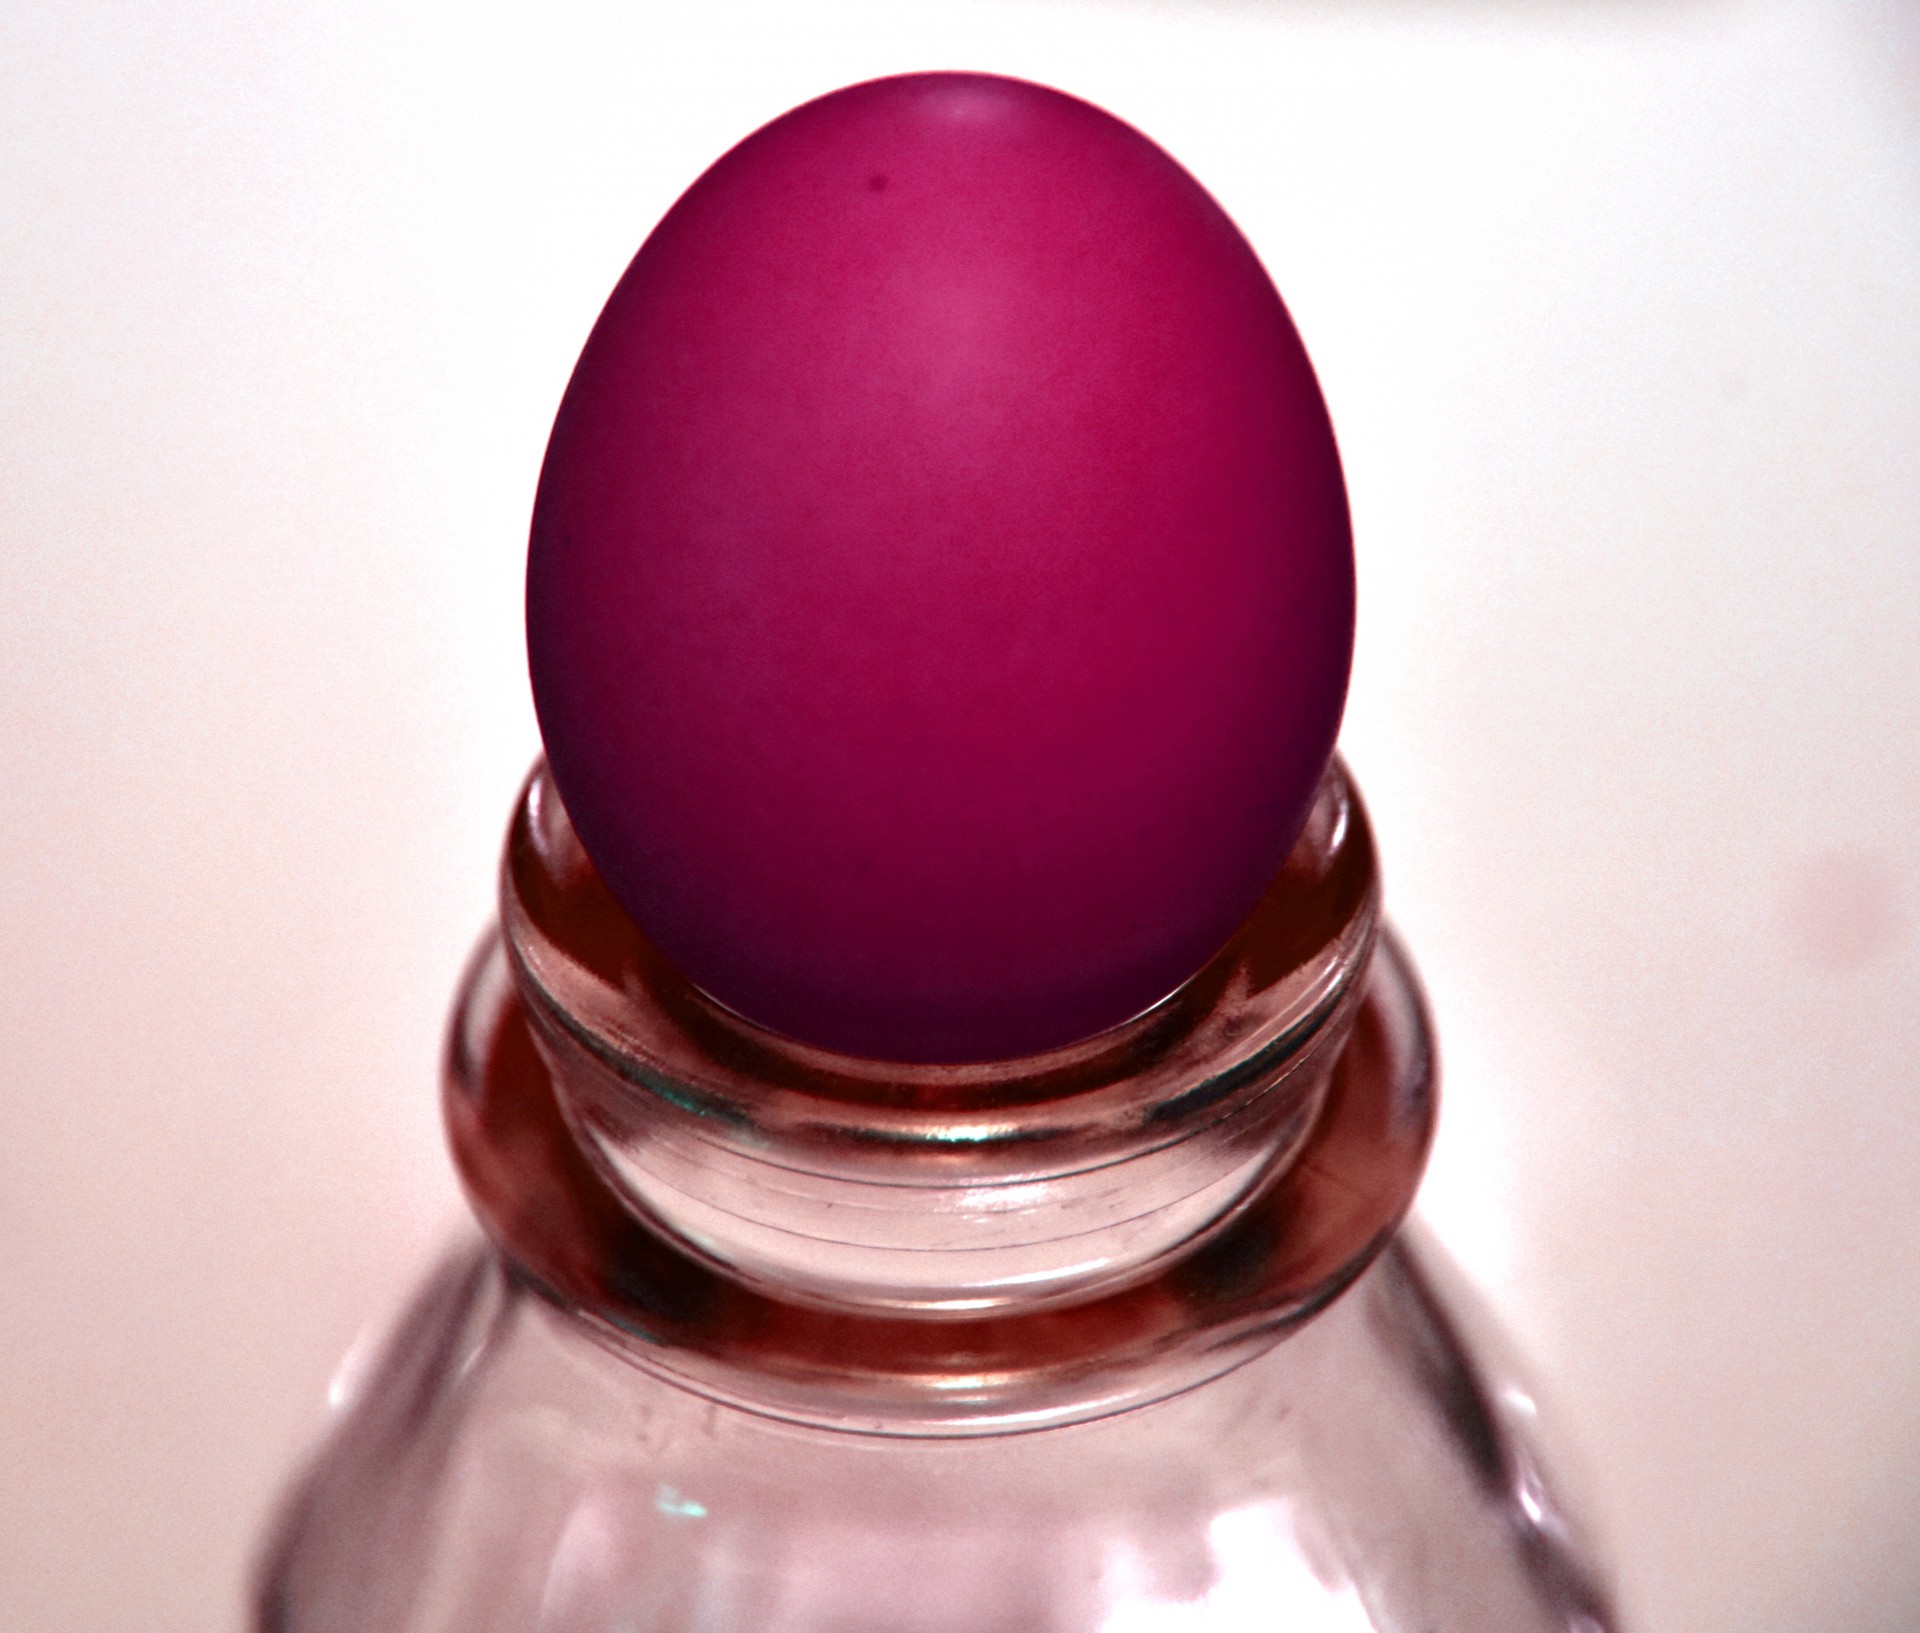 The Pink Egg